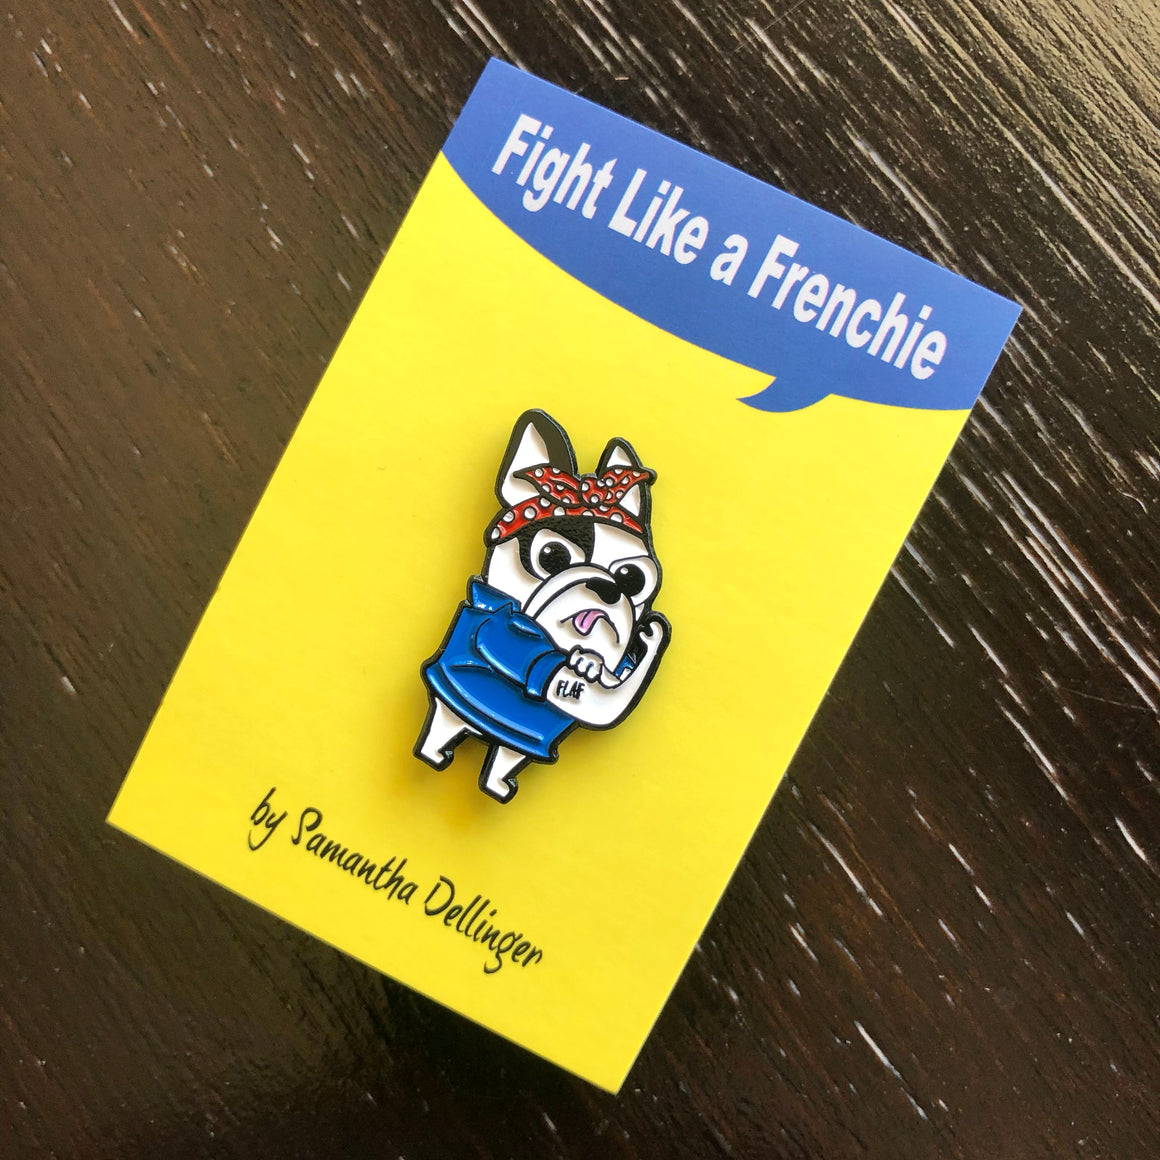 Fight Like A Frenchie Enamel Pin (AB)